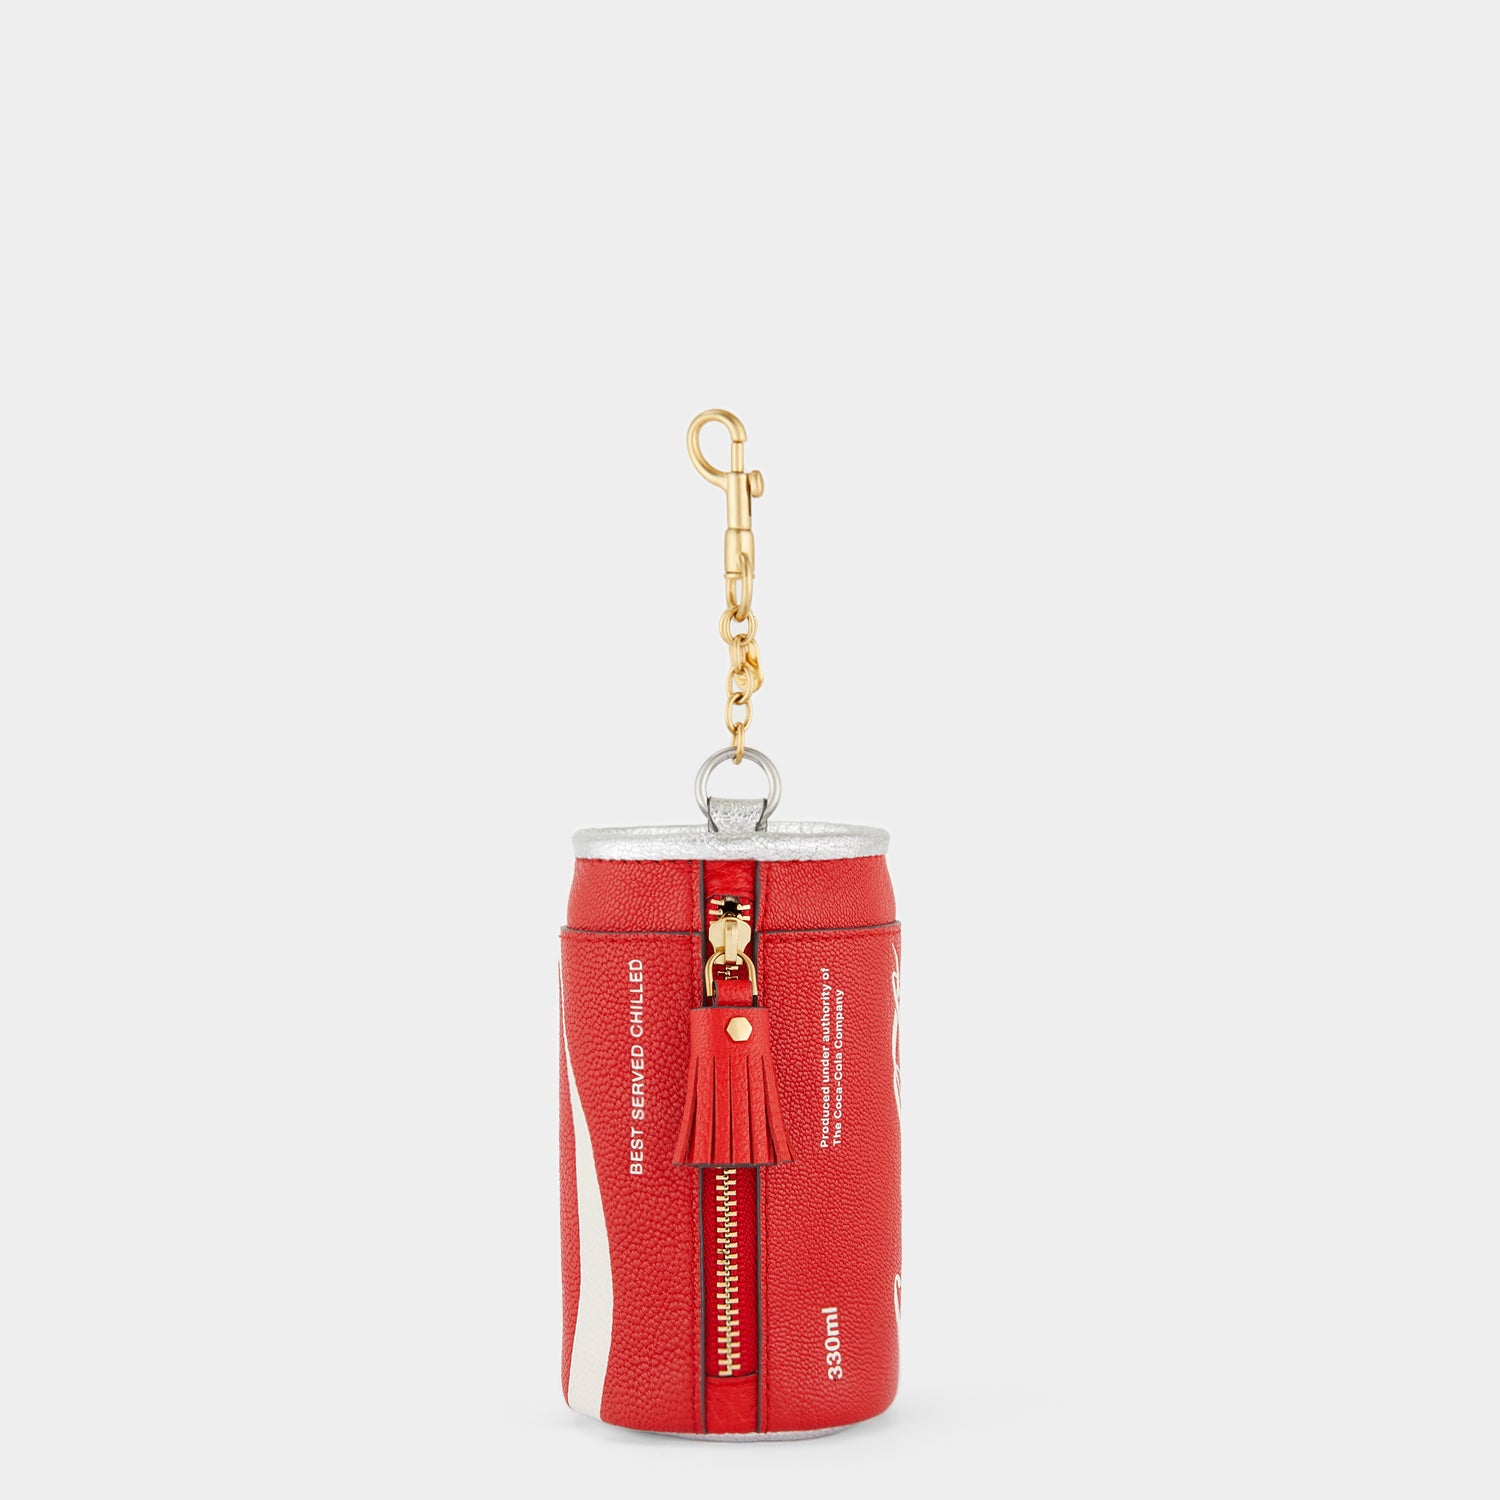 Anya Brands Coca Cola Coin Purse -

                  
                    Capra Leather in Bright Red -
                  

                  Anya Hindmarch UK
